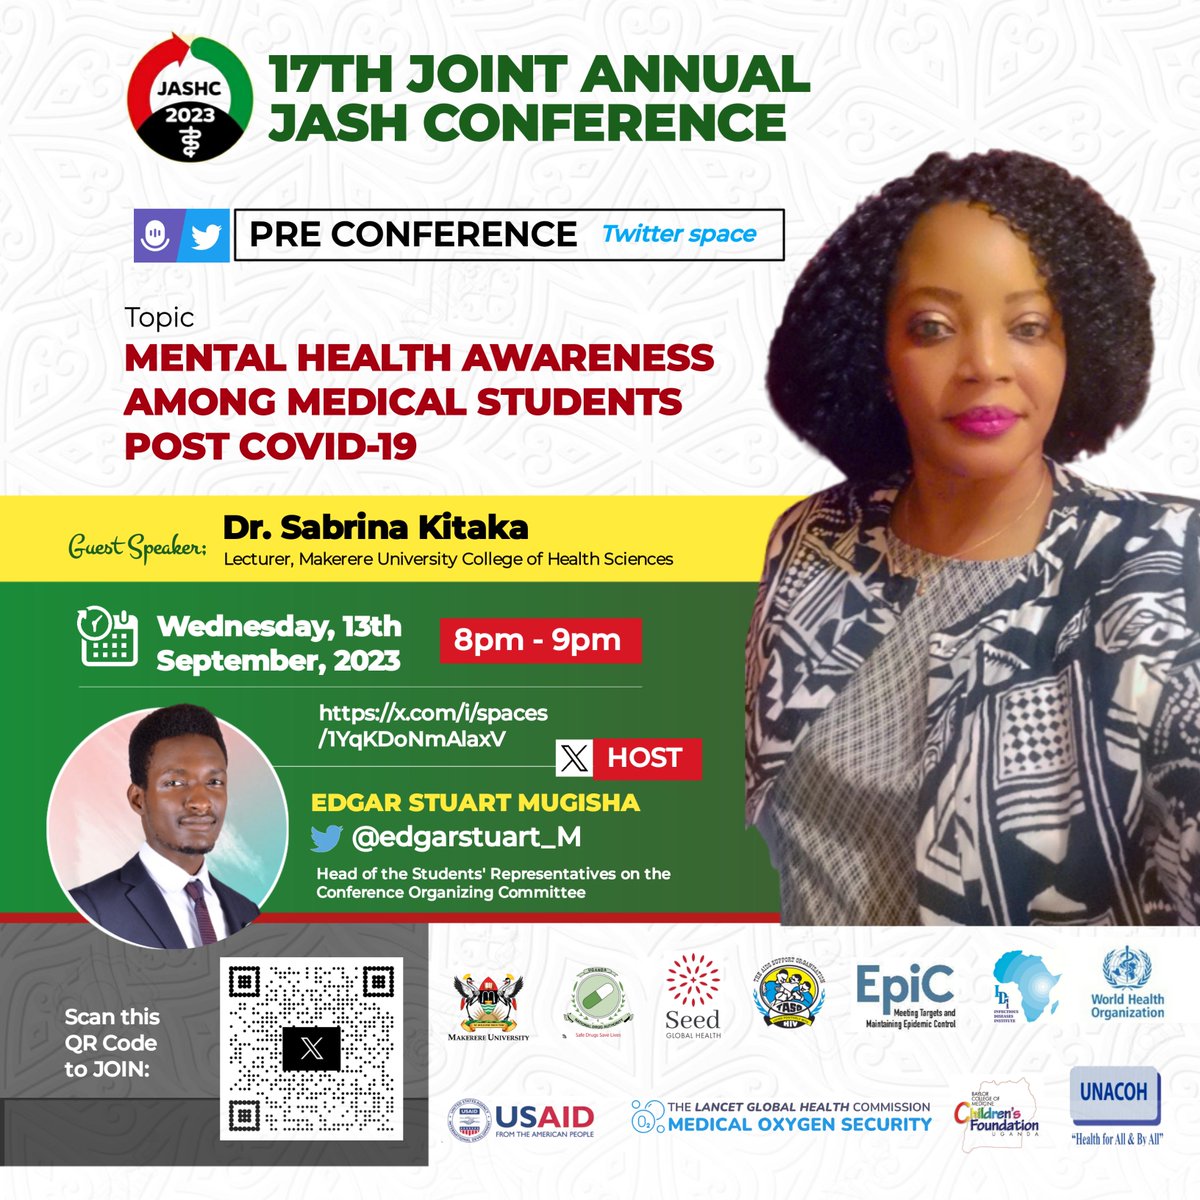 The 17TH annual JASH conference, has Mental health as one of it's sub-themes. In regards to this, I will host an X(twitter space) on 13th September from 8pm to 9pm, apart of the students' pre-conference activities. 
#JASHC2023
@MakerereCHS 
@SabrinaKitaka 
@BushHerbert1